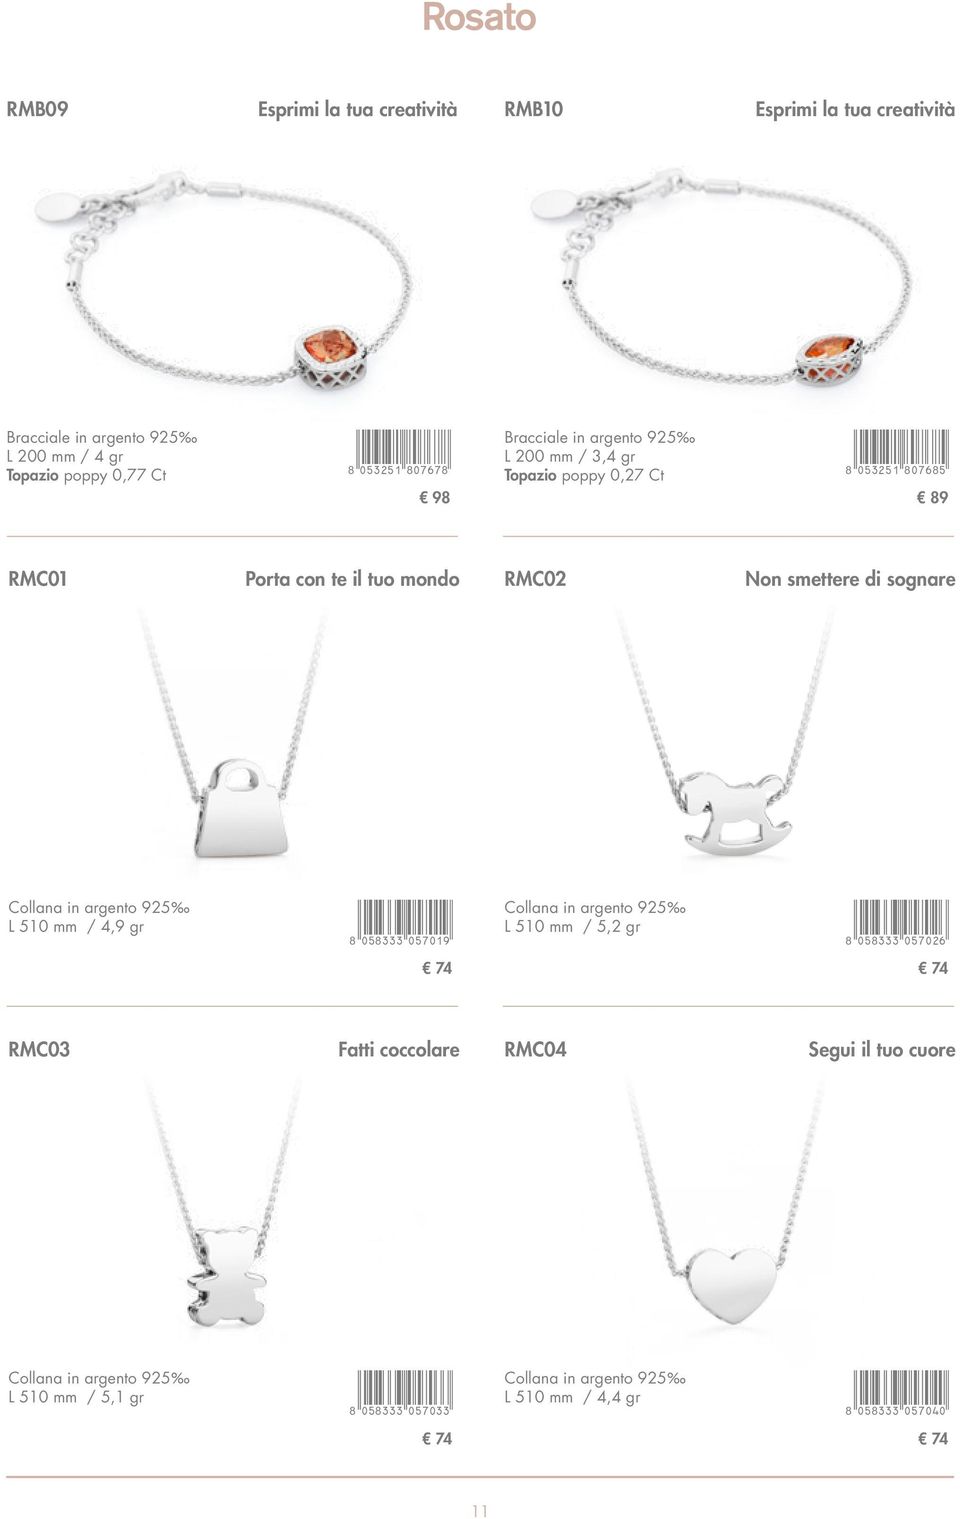 L 510 mm / 4,9 gr 8APINND*afhabj+ Collana in argento 925 L 510 mm / 5,2 gr 8APINND*afhacg+ 74 74 RMC03 Fatti coccolare RMC04 Segui